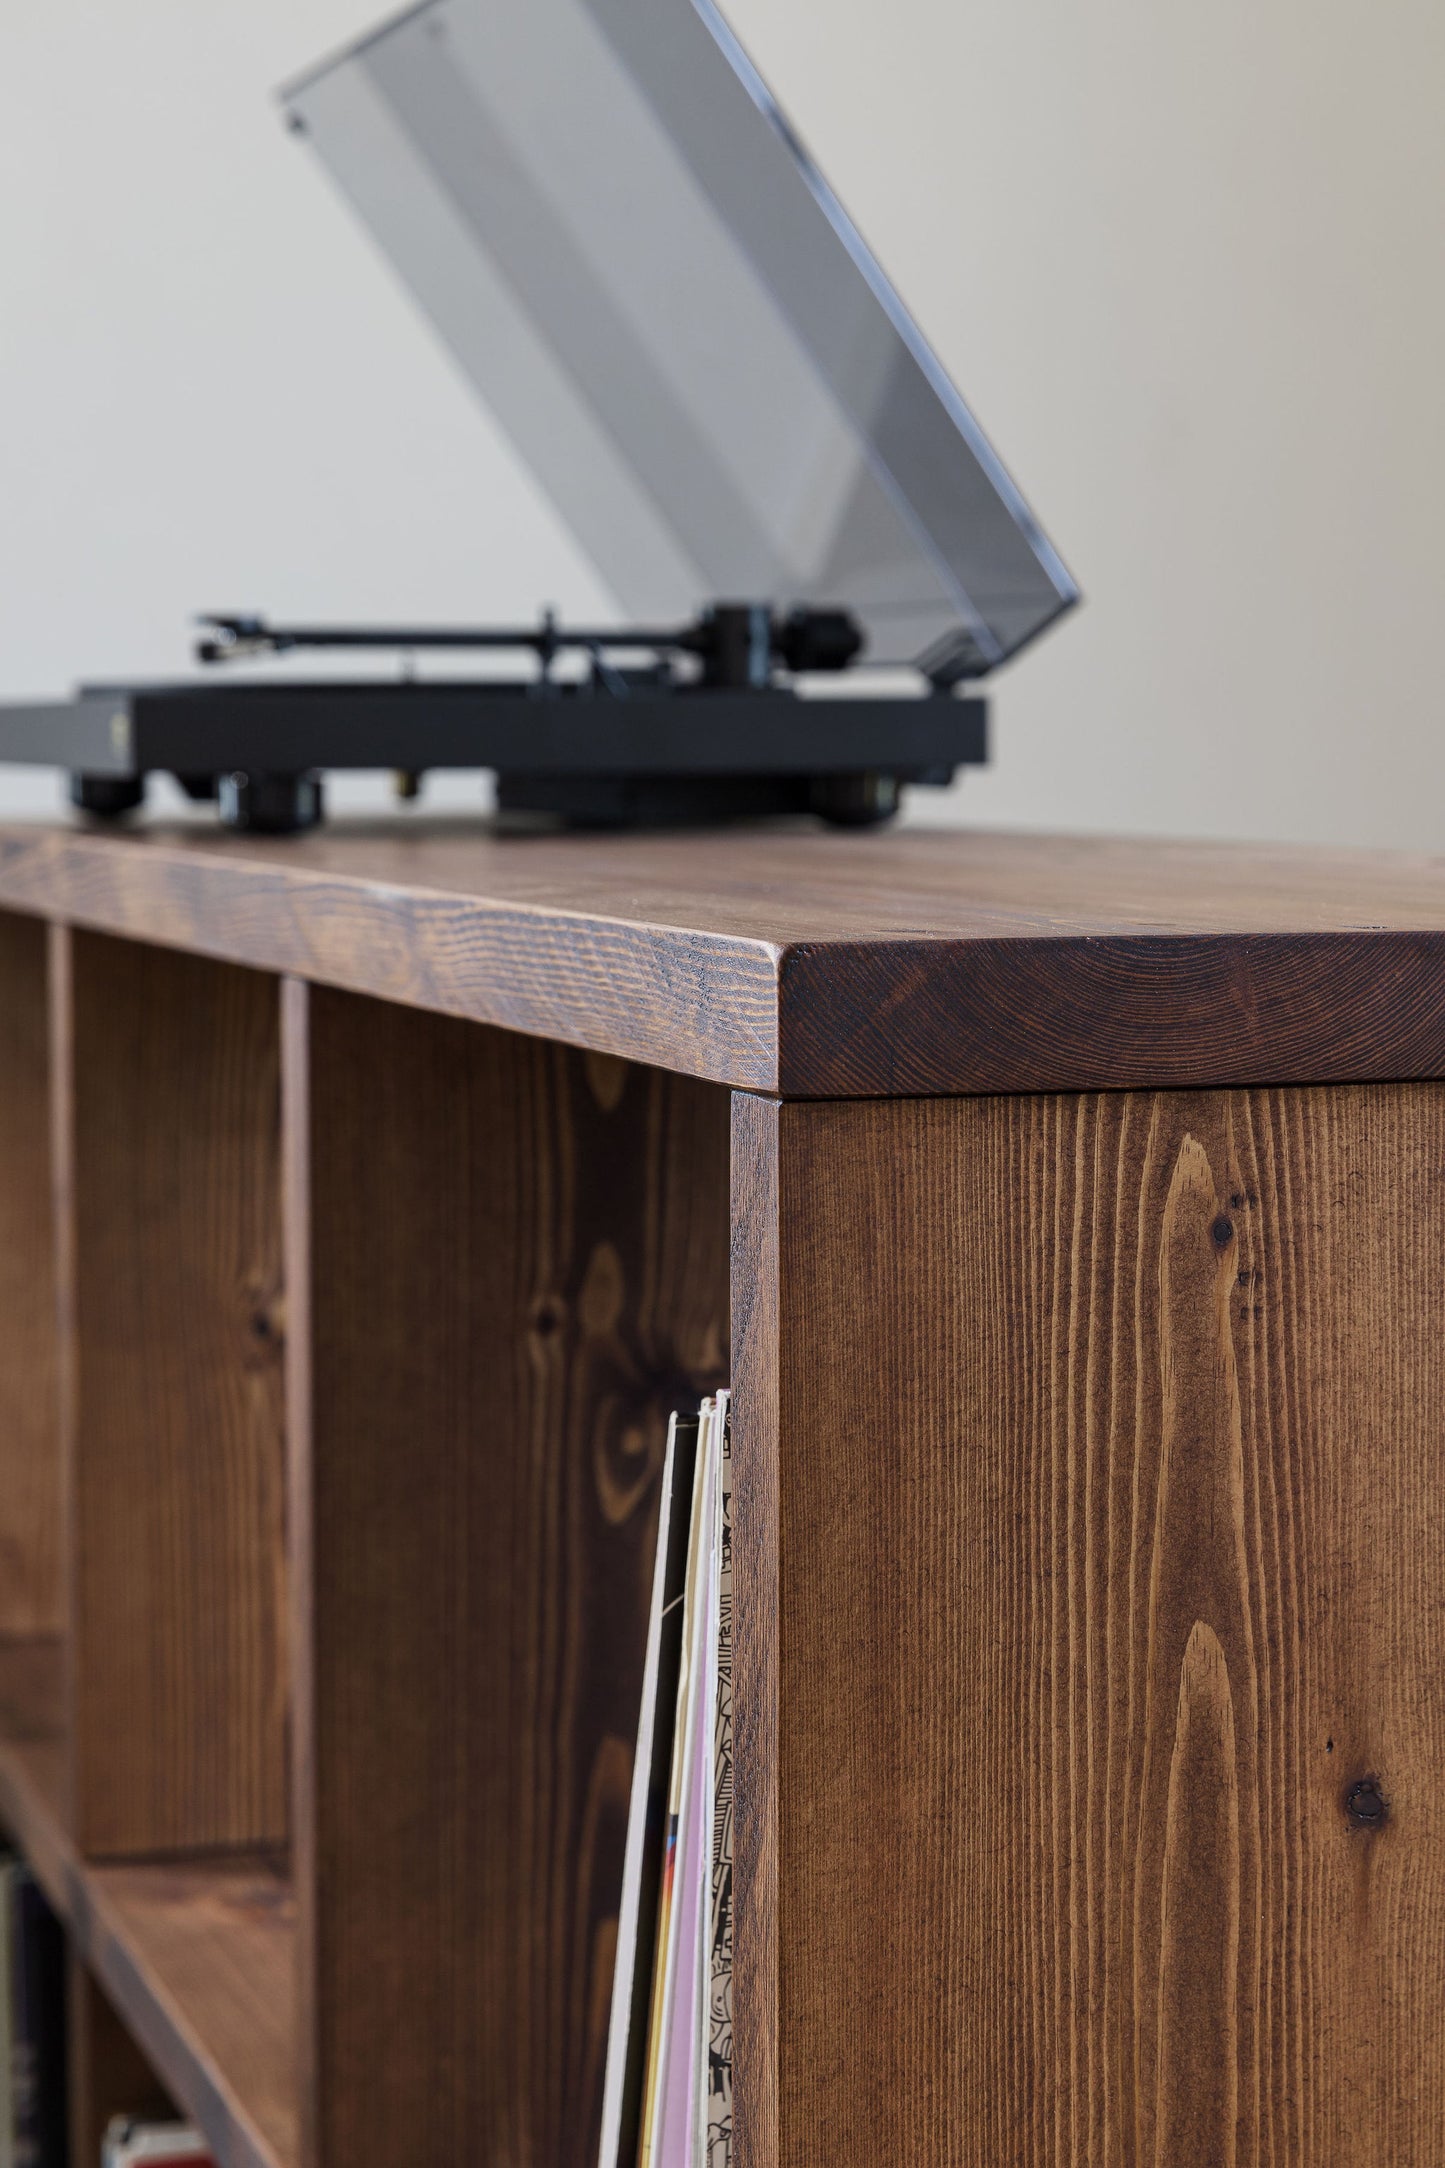 'Castle' DJ Stand, Record Player Stand or Sideboard